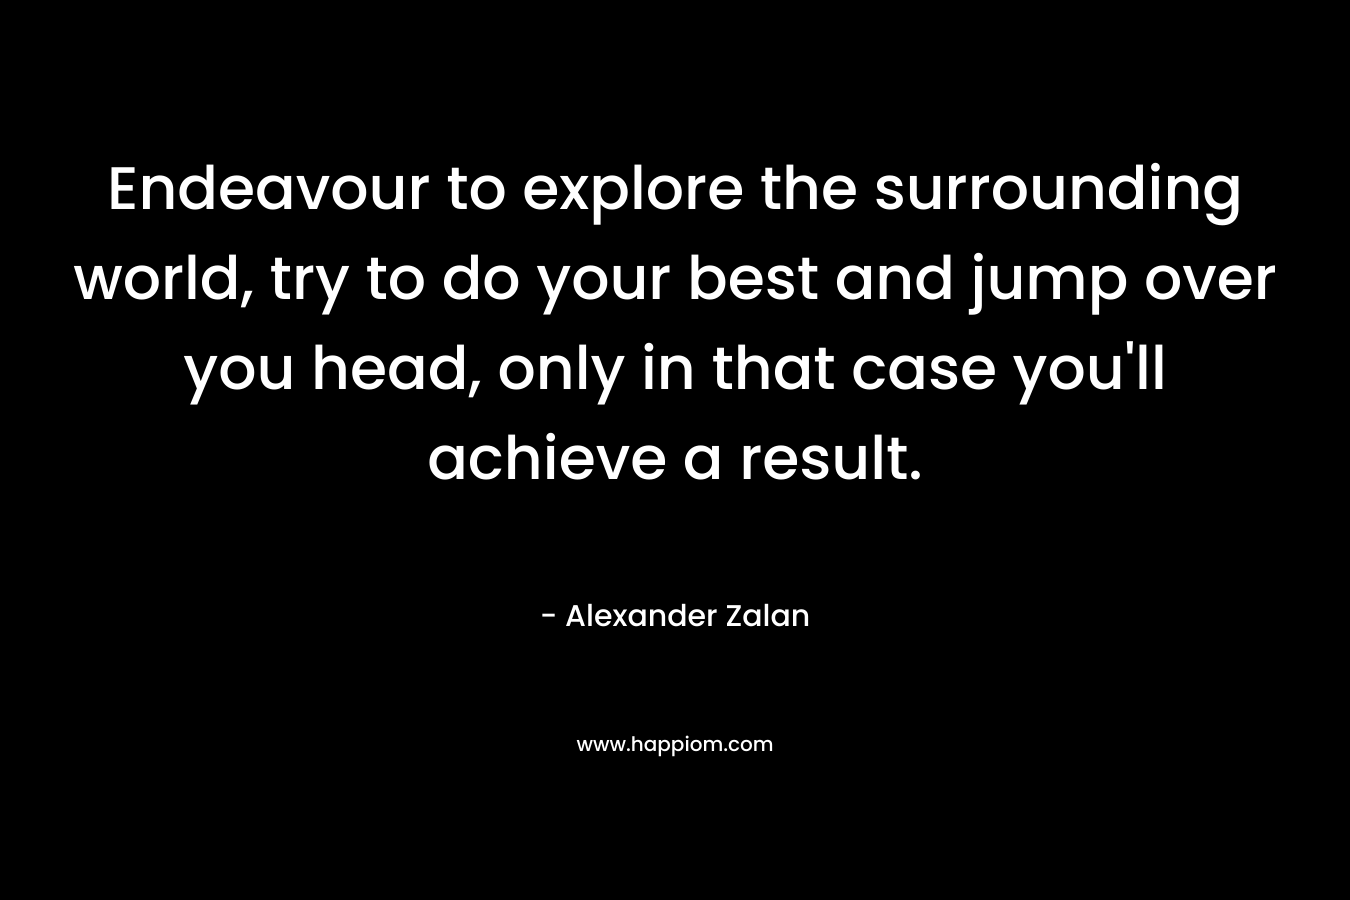 Endeavour to explore the surrounding world, try to do your best and jump over you head, only in that case you’ll achieve a result. – Alexander Zalan